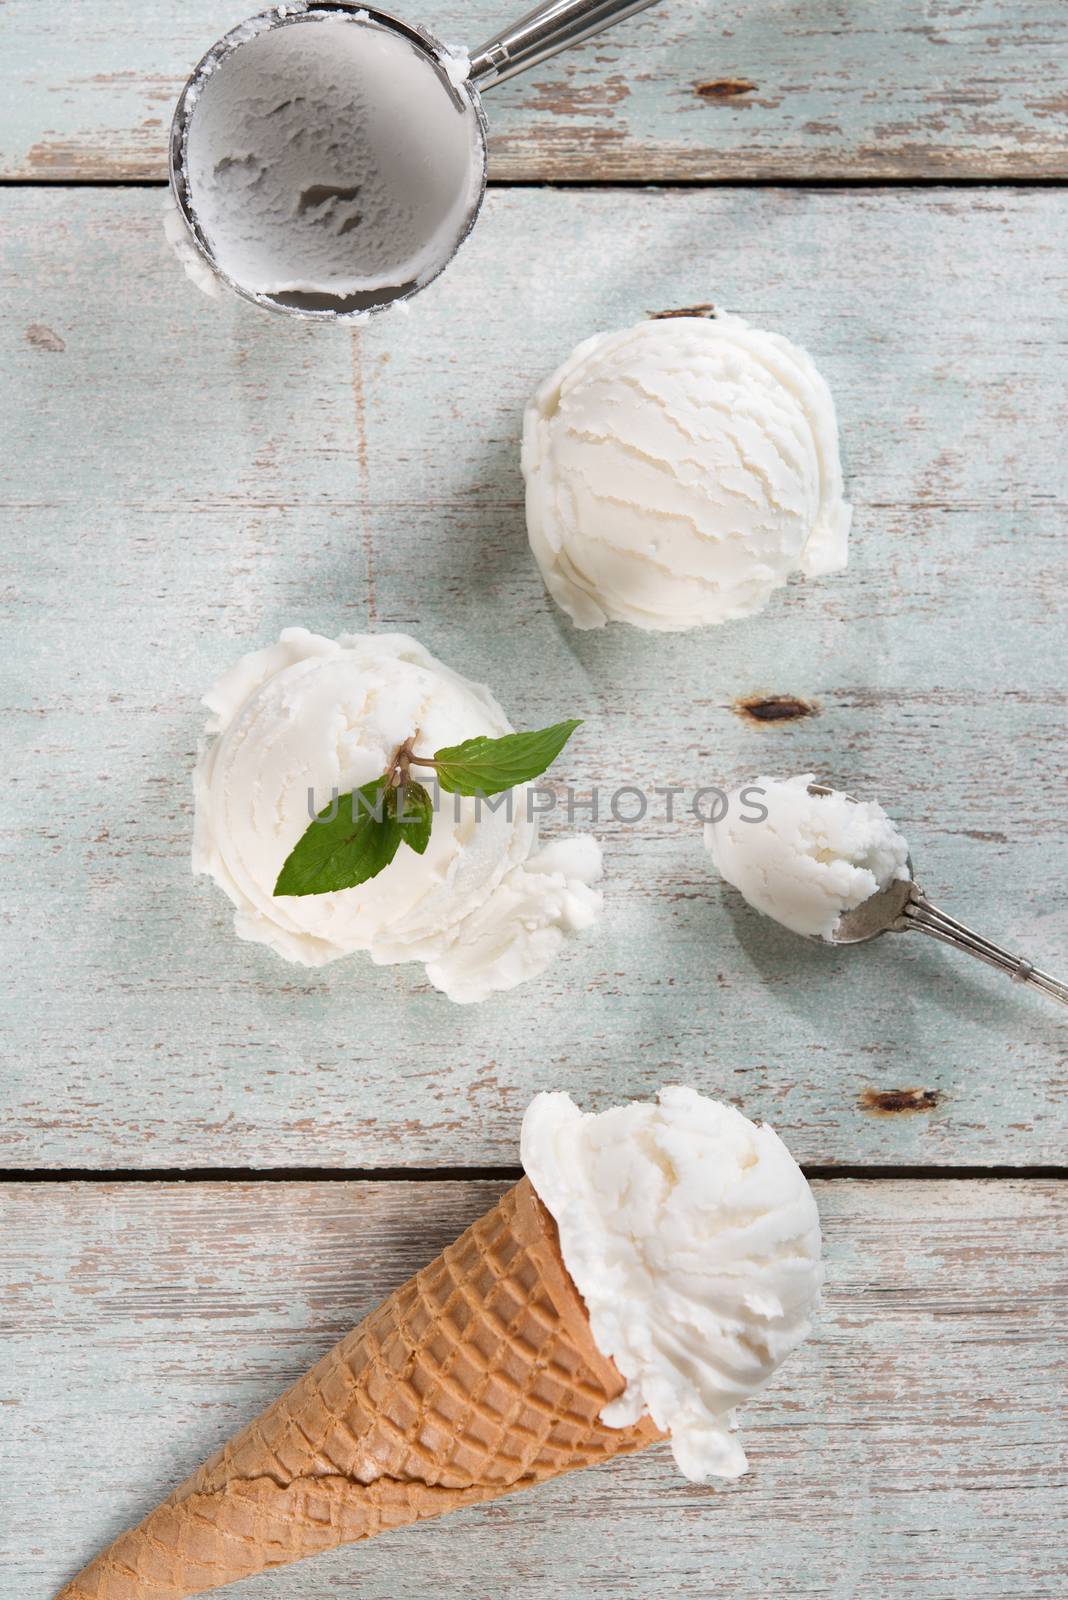 Top view vanilla ice cream in waffle cone with utensil on wood background.